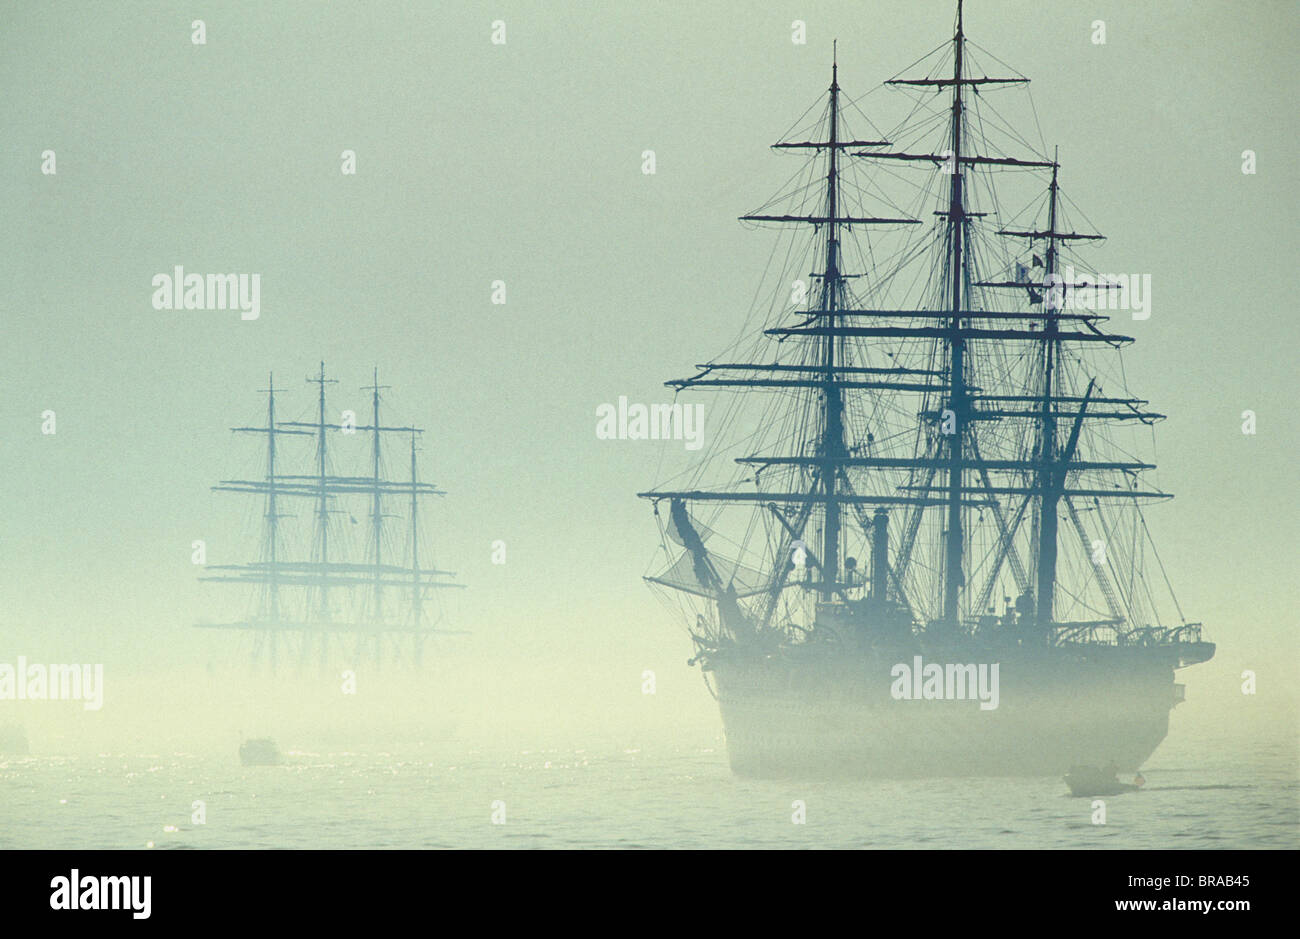 Two Tall ships in fog during Boston tall ships parade, Massachusetts, USA. 'Amerigo Vespucci' is in the foregound. Stock Photo